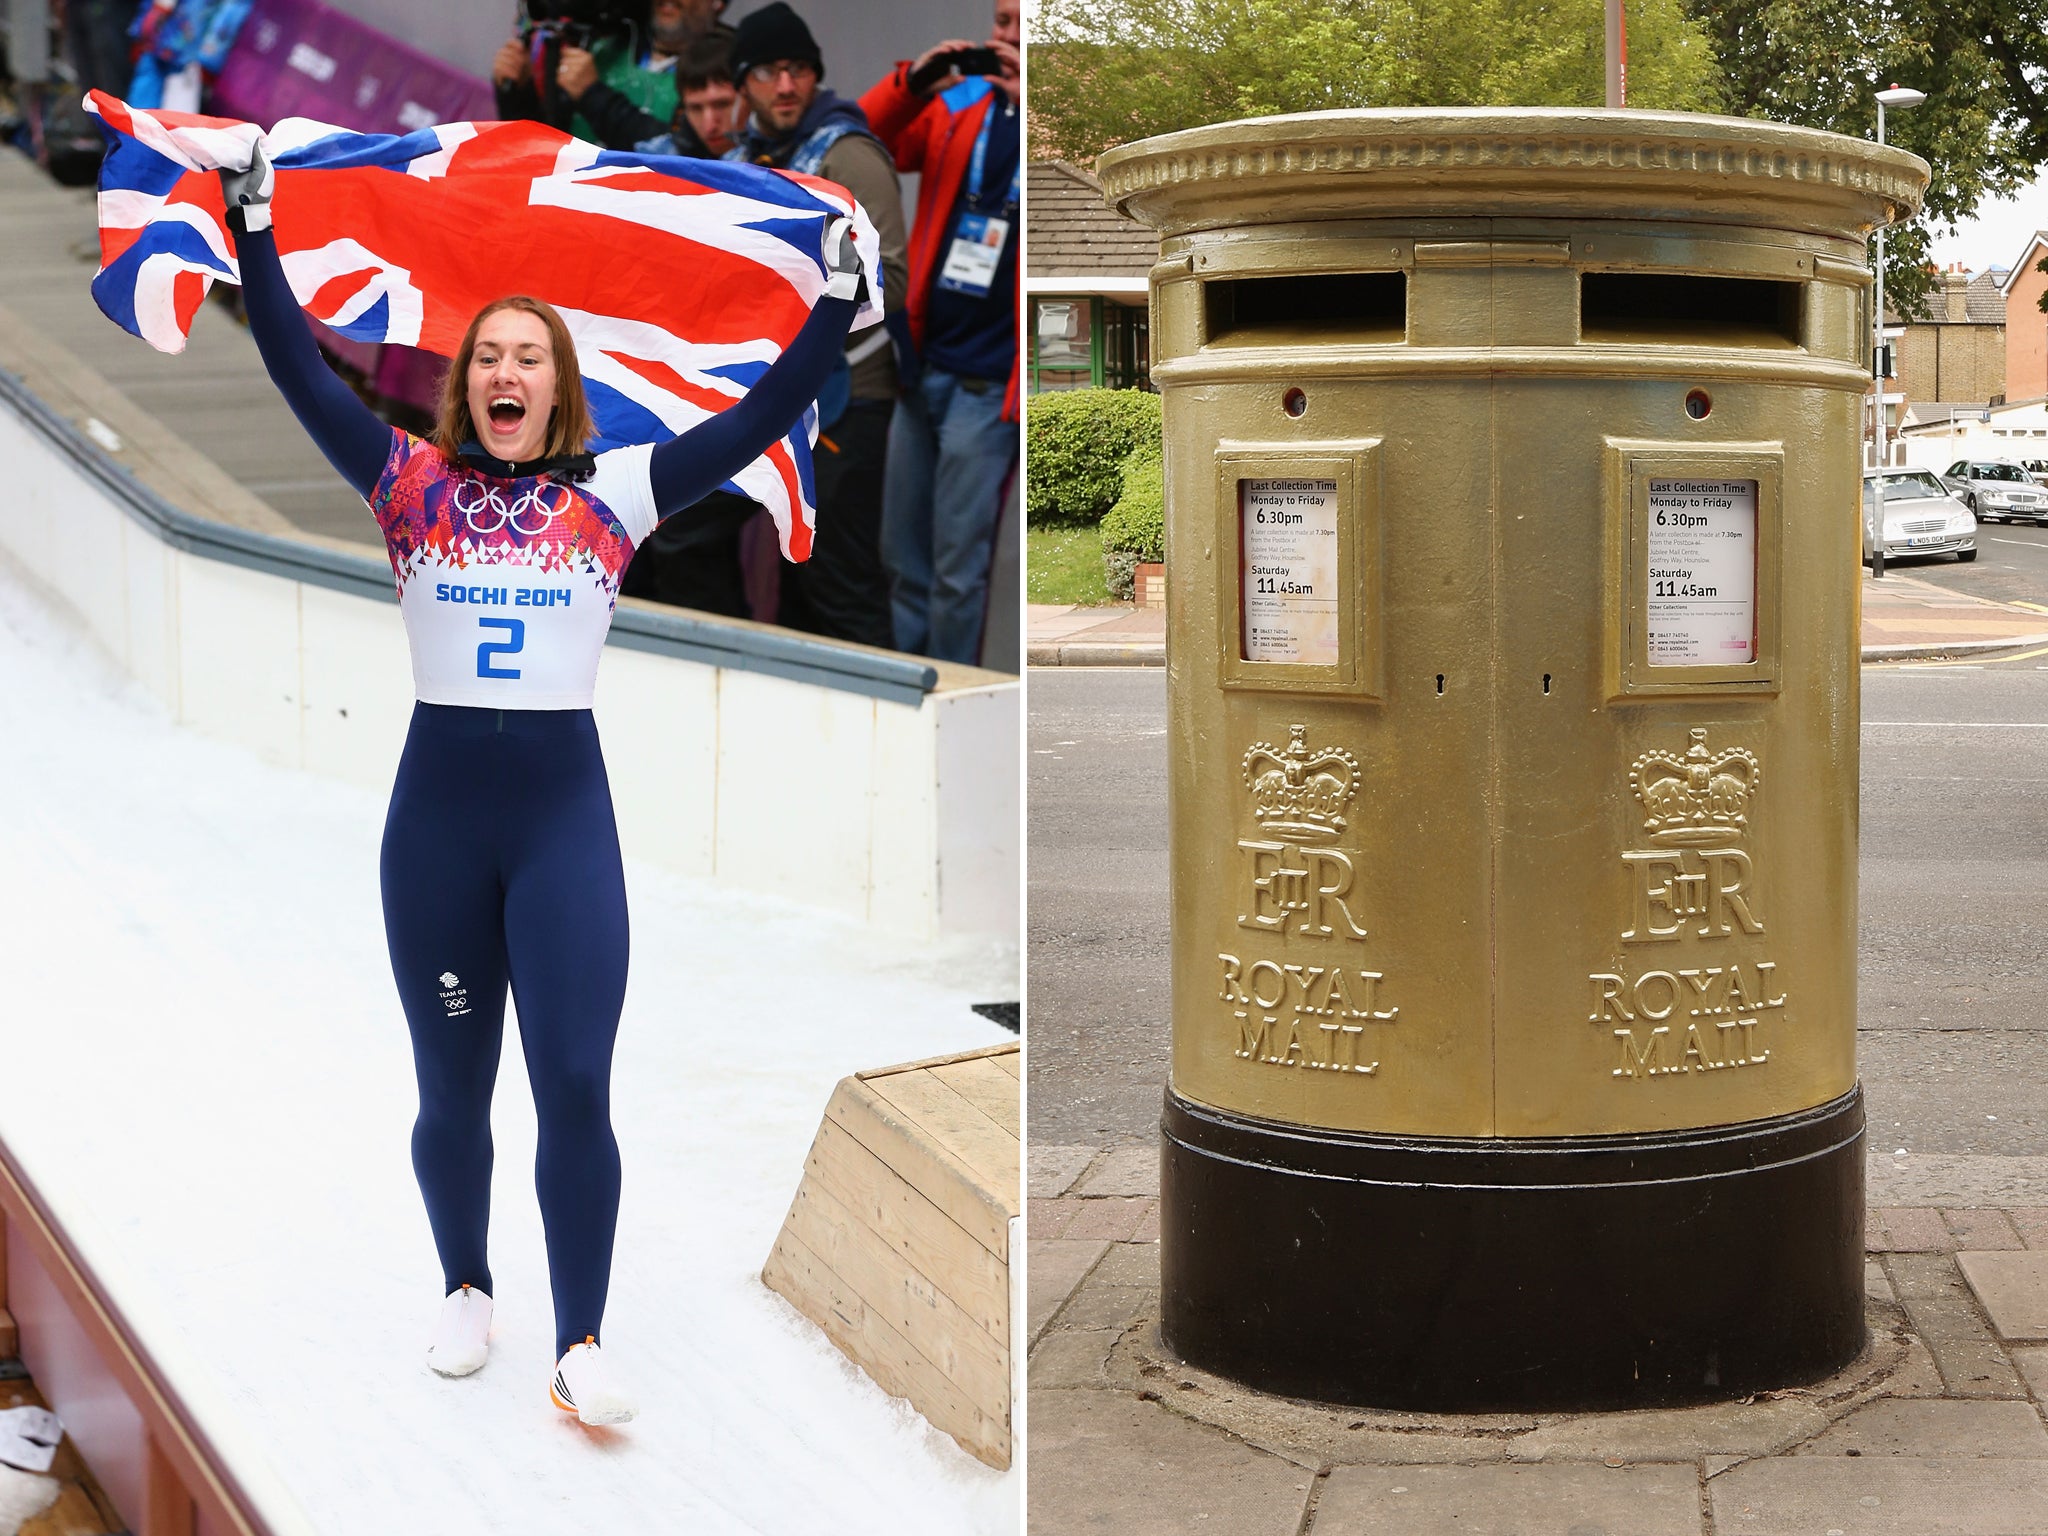 Royal Mail have rejected talk of dedicating a postbox in Sevenoaks to Lizzy Yarnold for her Sochi skeleton gold medal